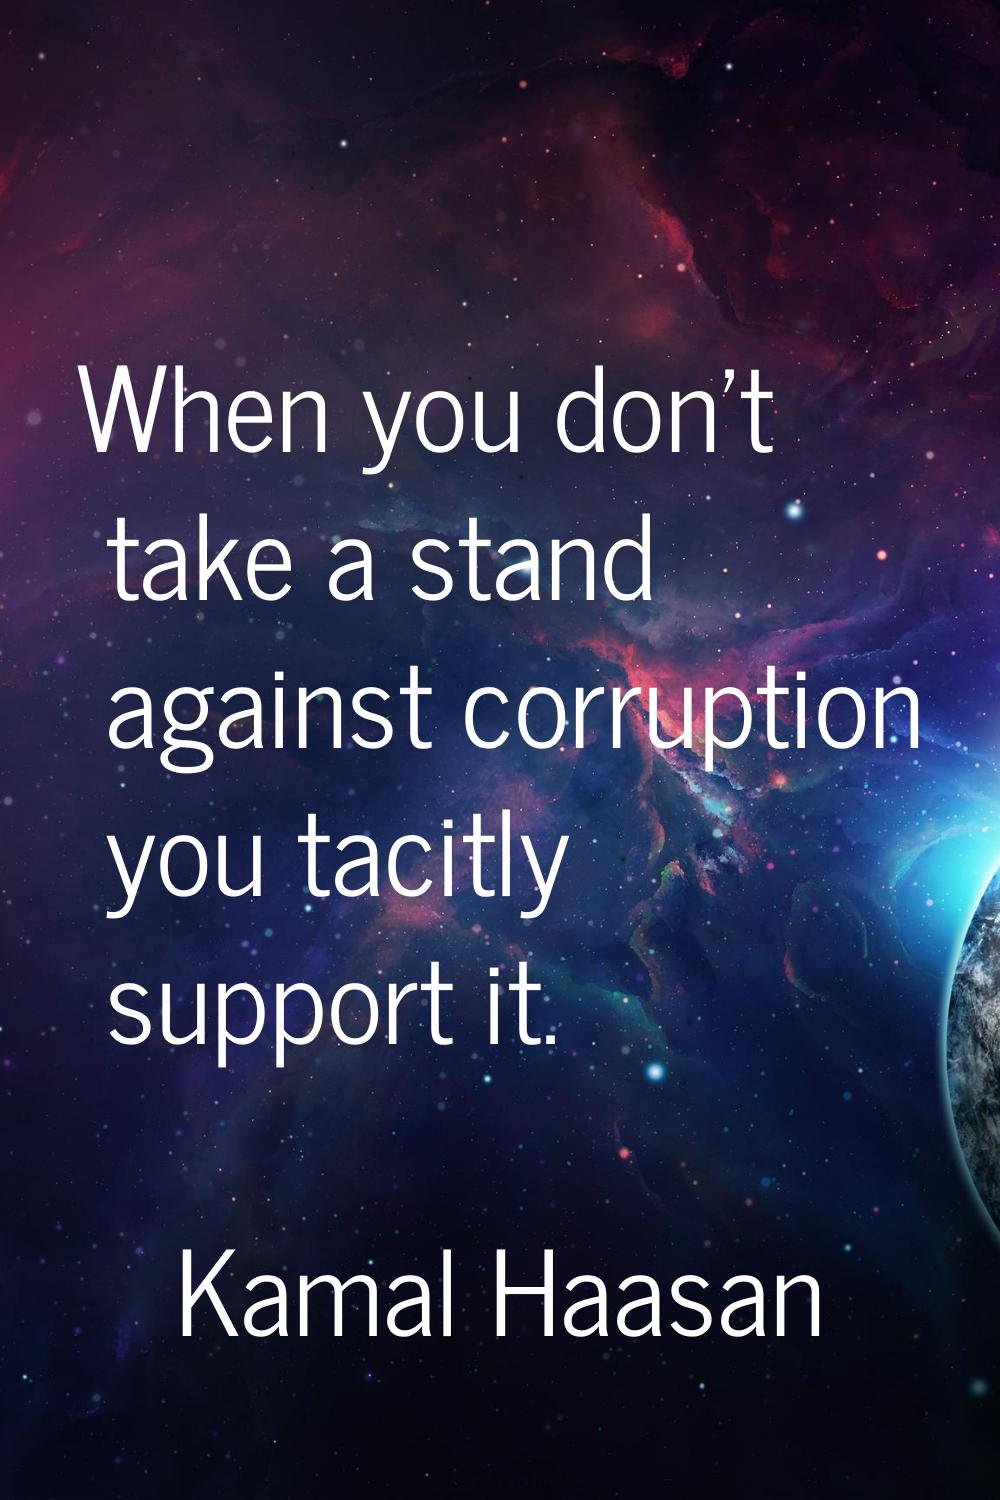 When you don't take a stand against corruption you tacitly support it.